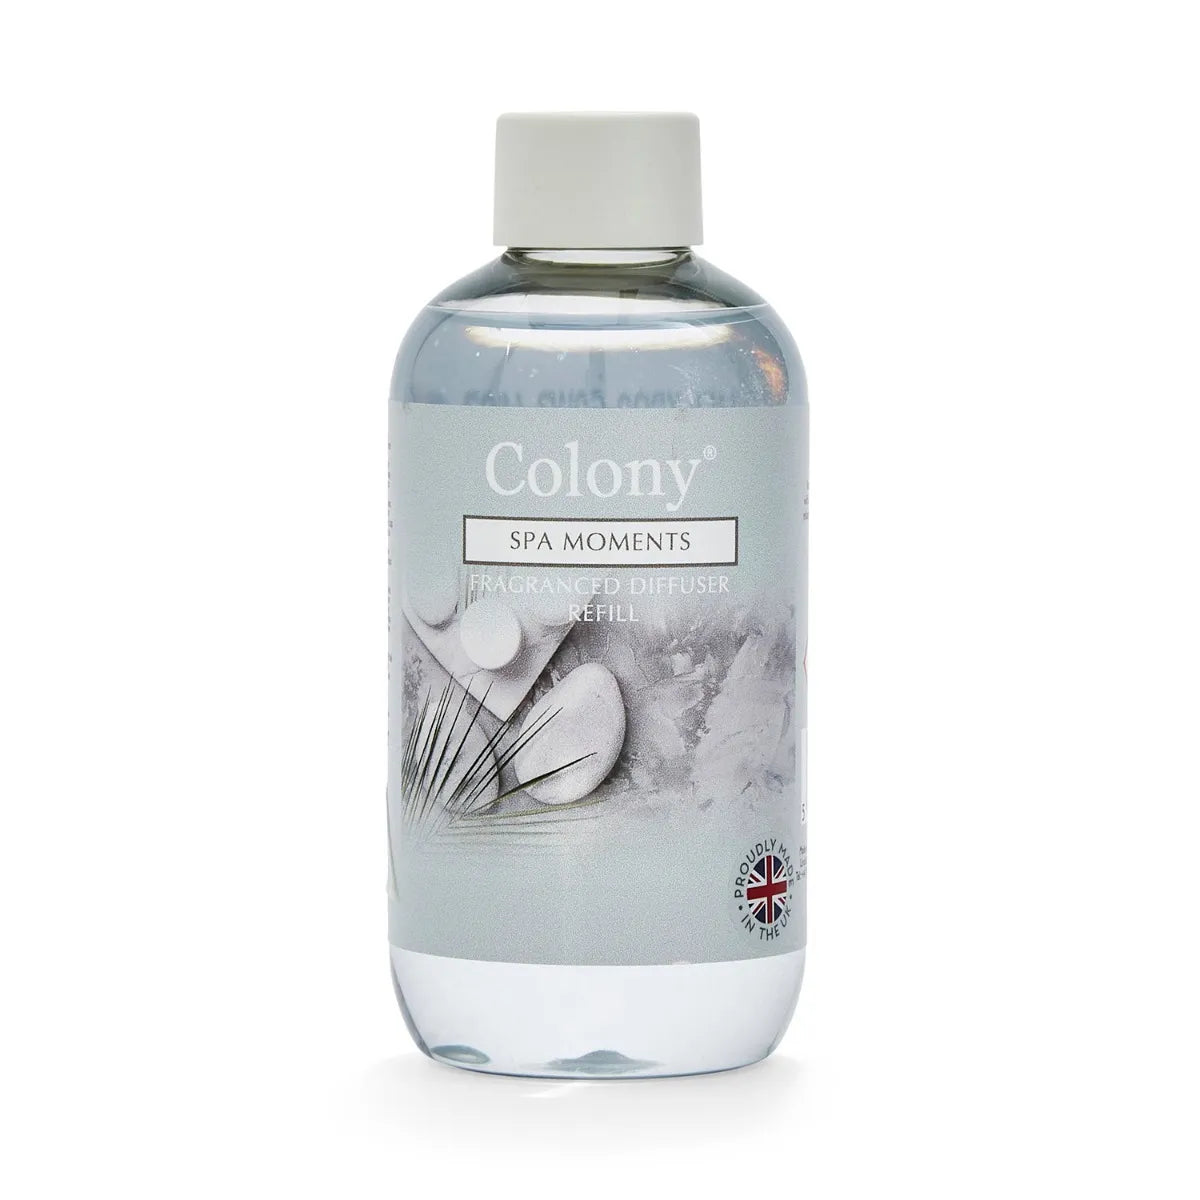 Wax Lyrical Colony Spa Moments 200ml Reed Diffuser Refill